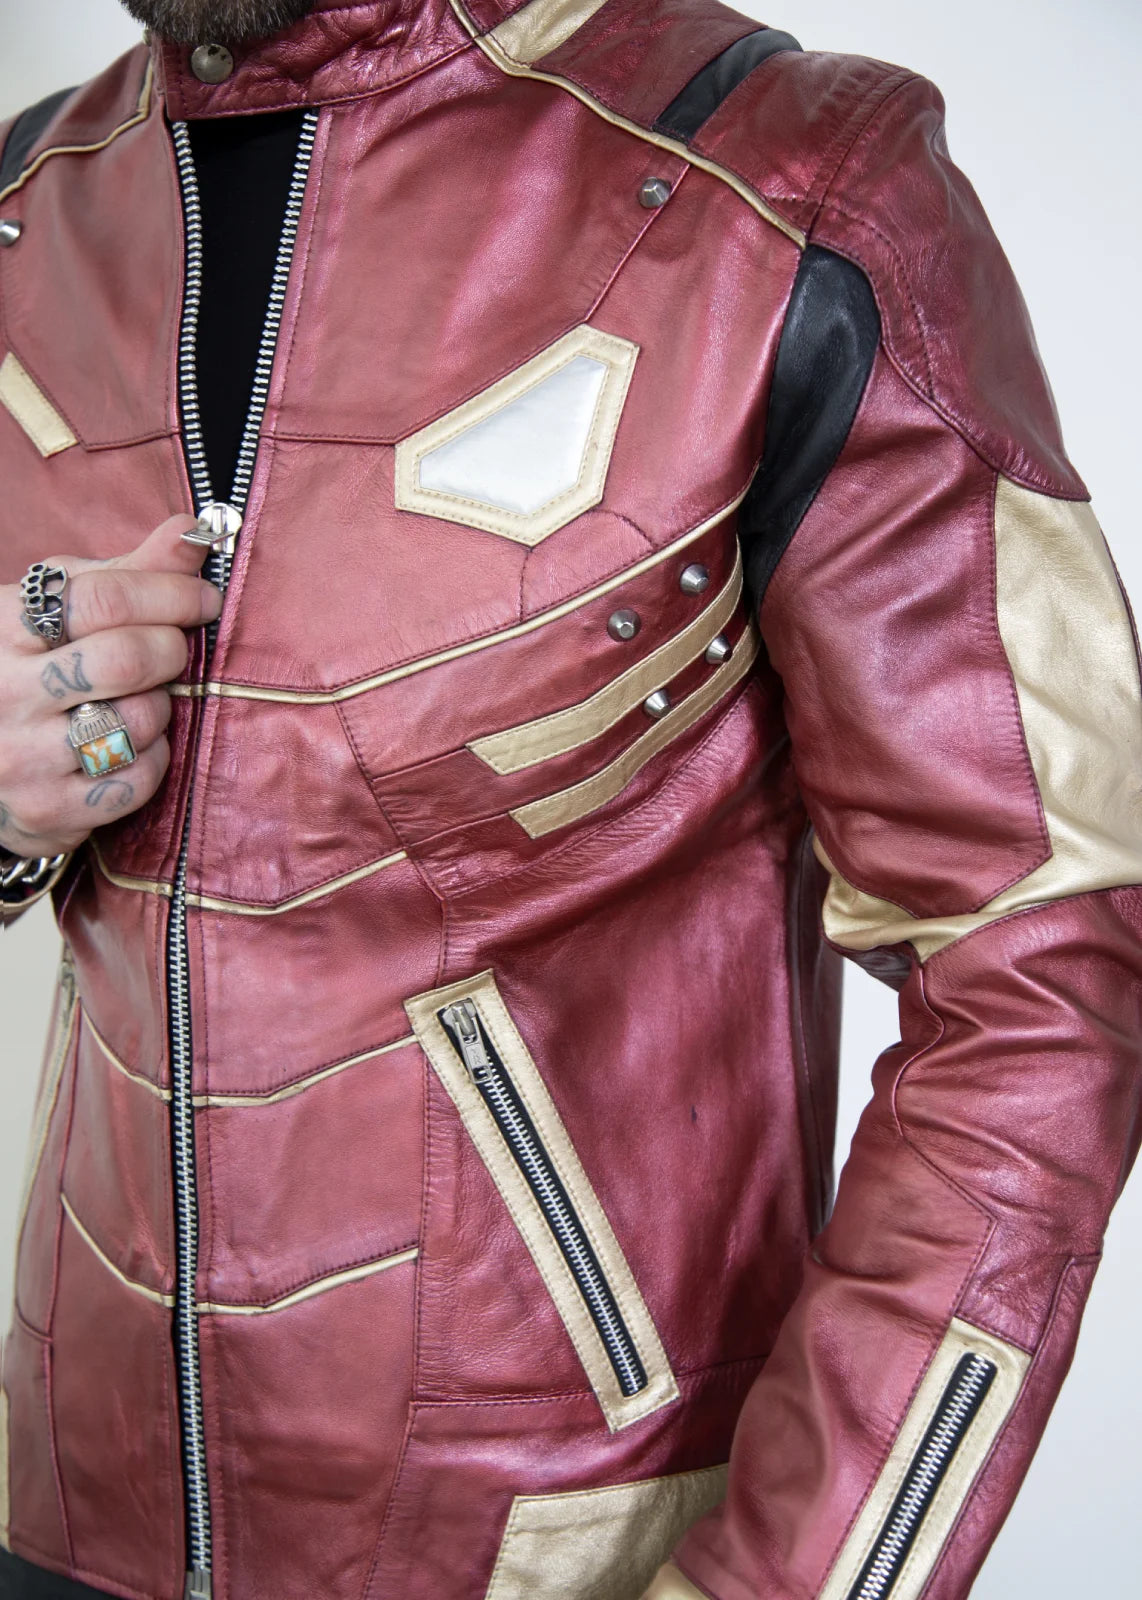 Iron Man Armor (Marvel) Platinum Red & Gold Leather Jacket by Luca Designs